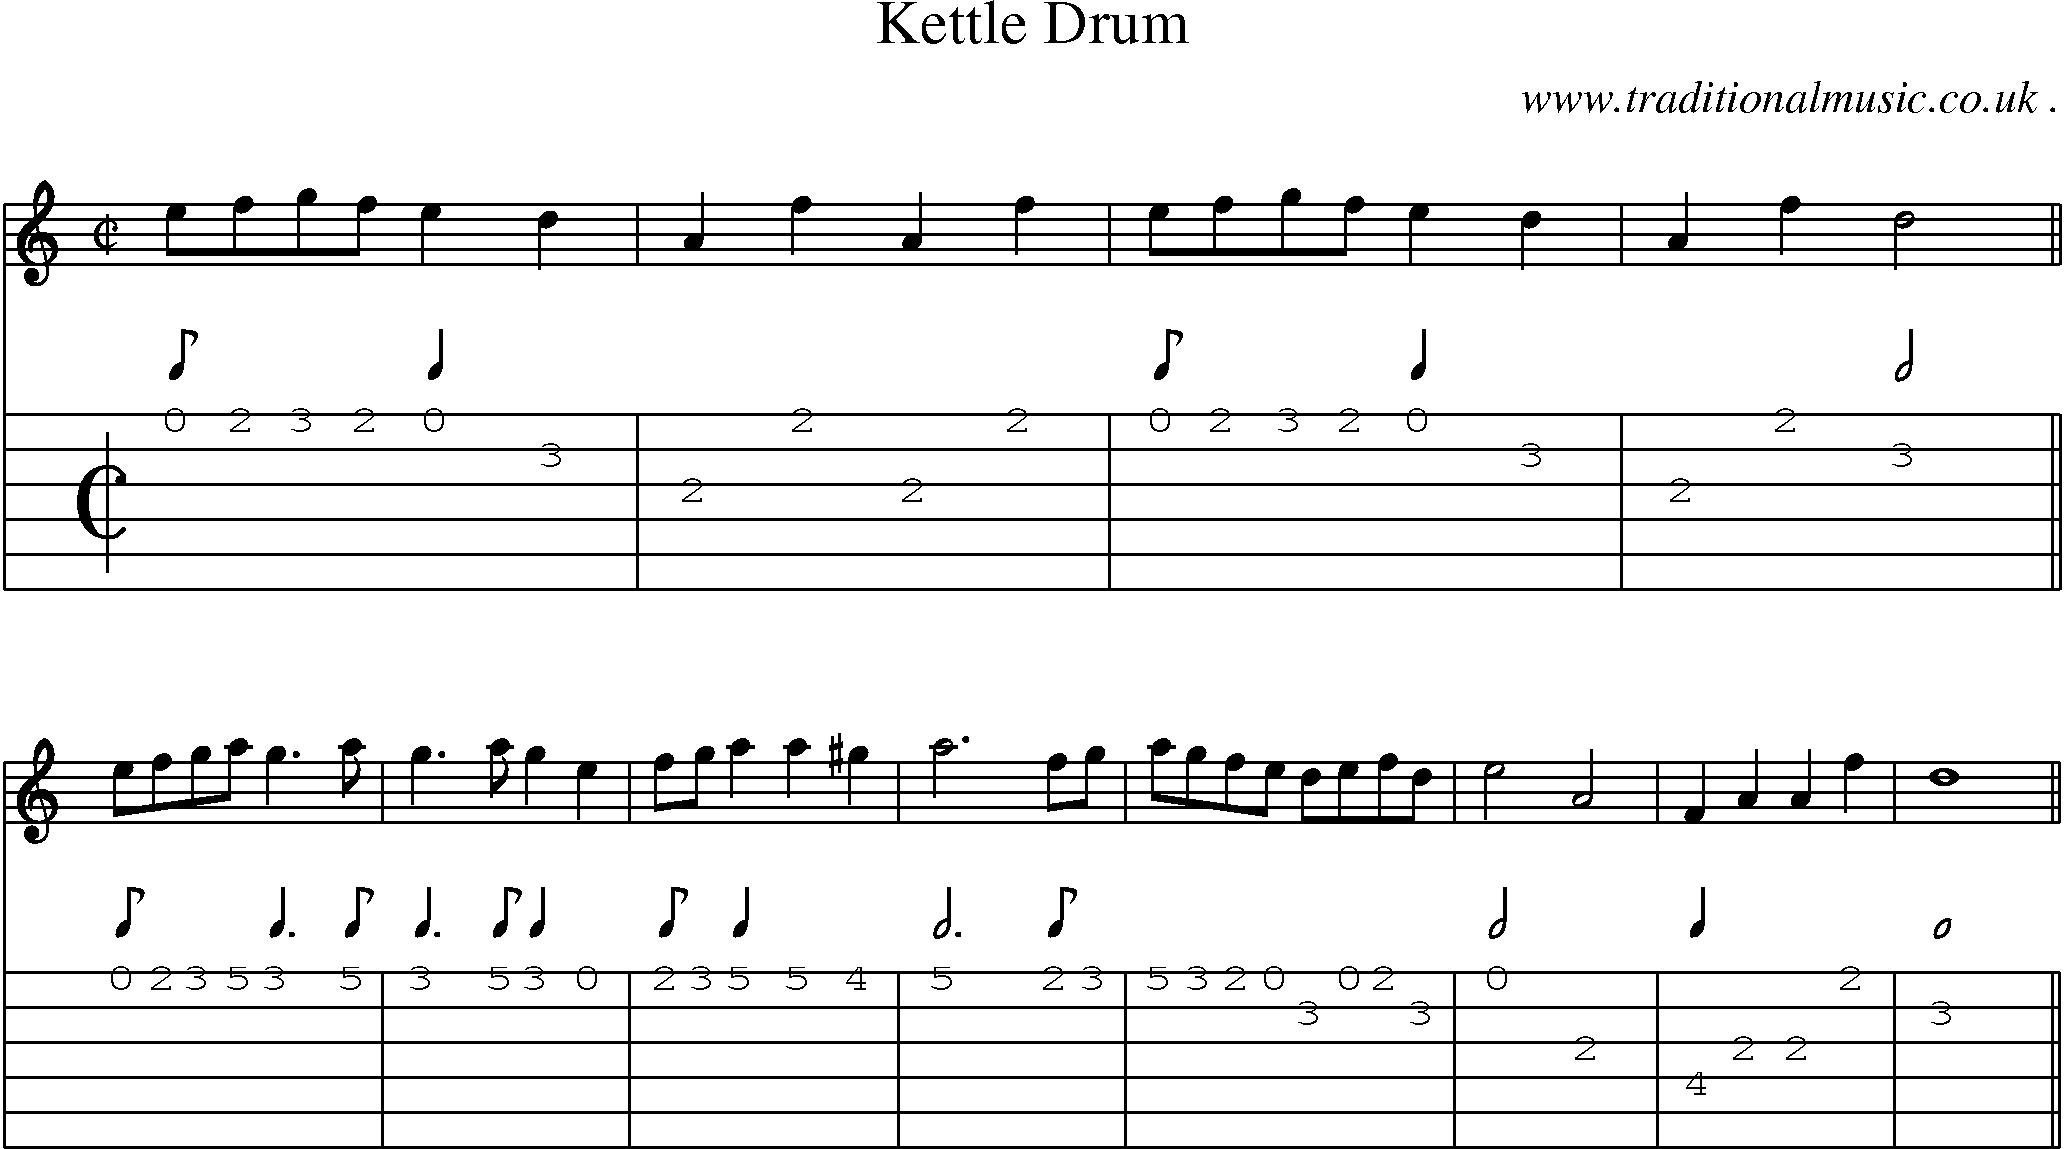 Sheet-Music and Guitar Tabs for Kettle Drum